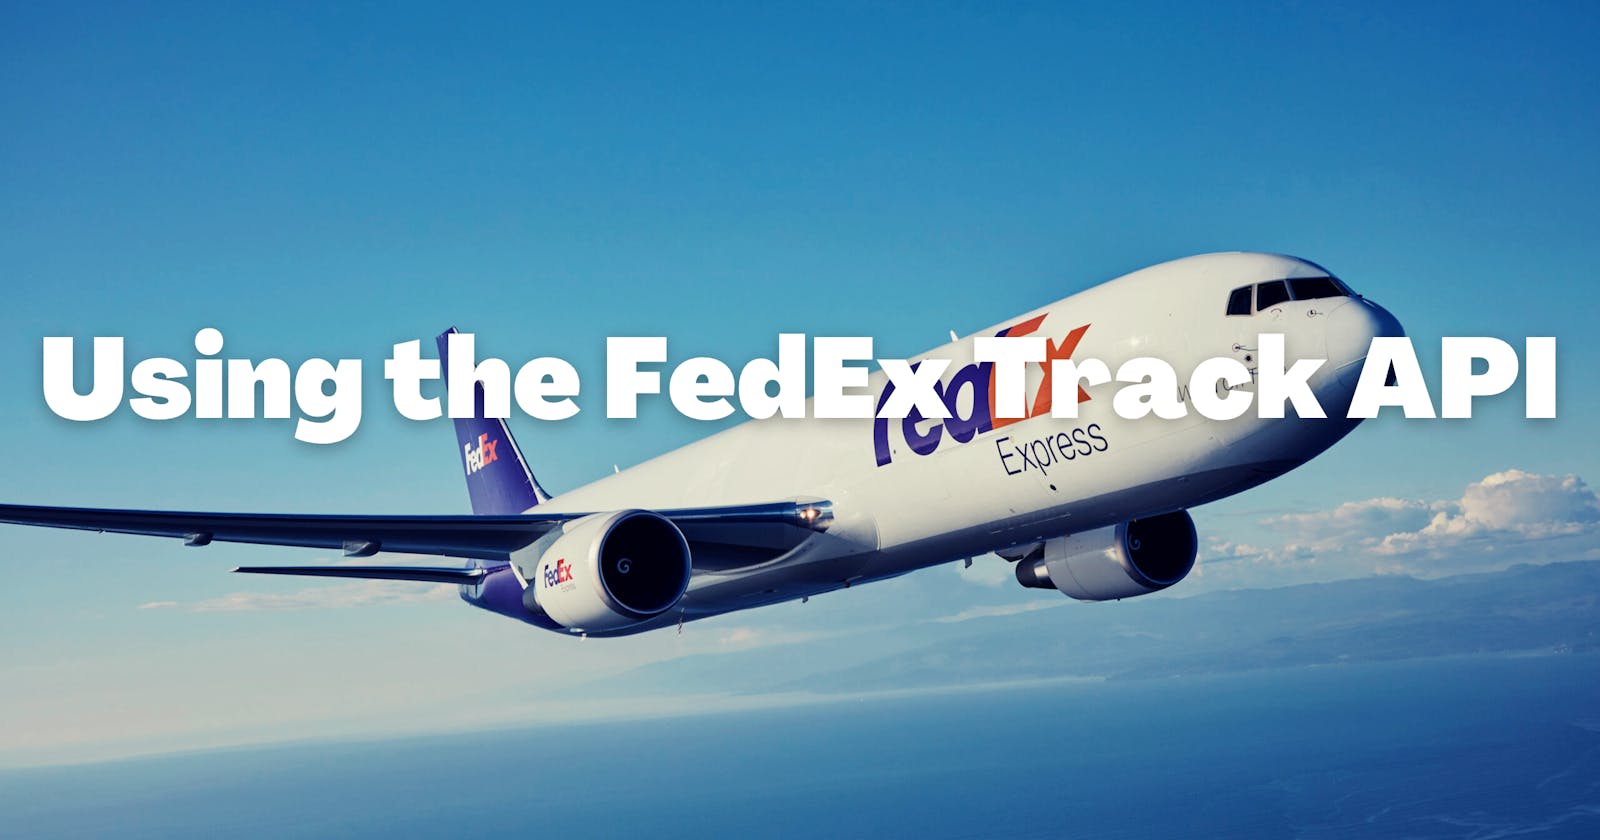 Using the FedEX® Track API to obtain real-time tracking information for shipments